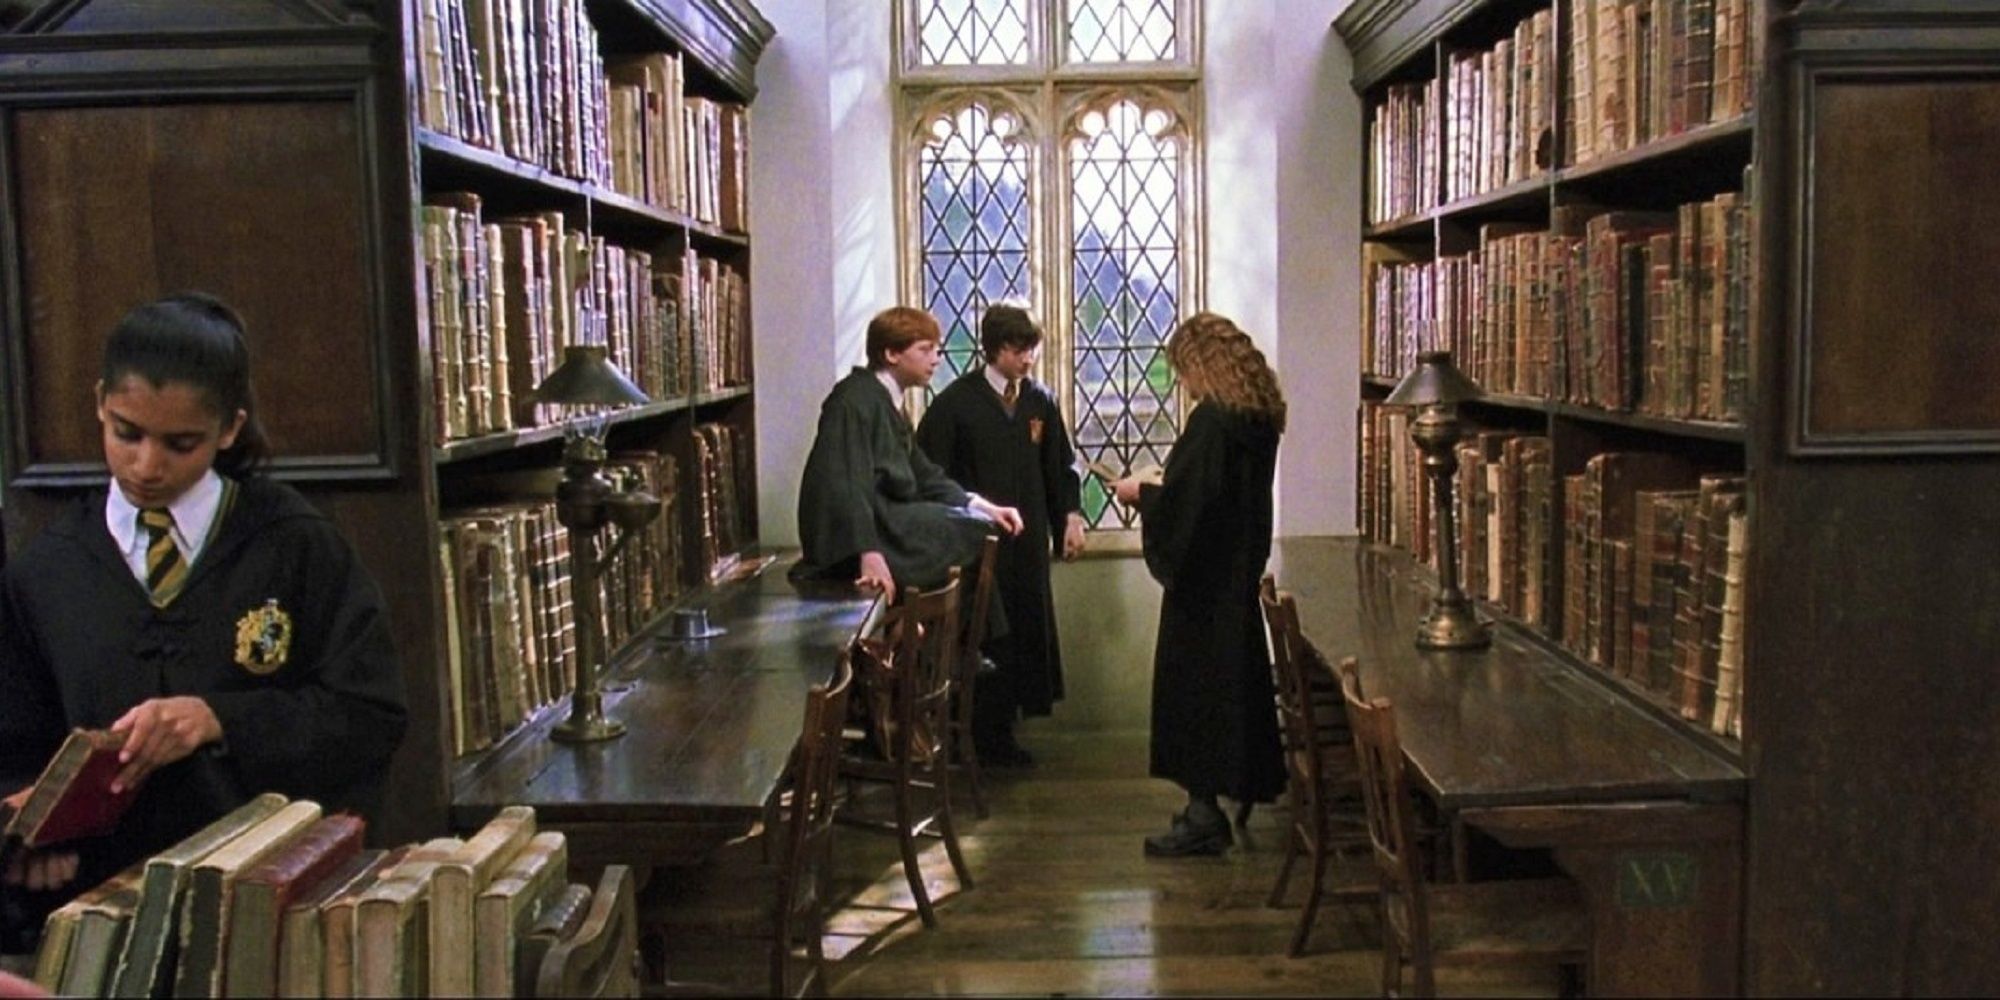 Harry Potter with Ron and Hermione in the Hogwarts library.